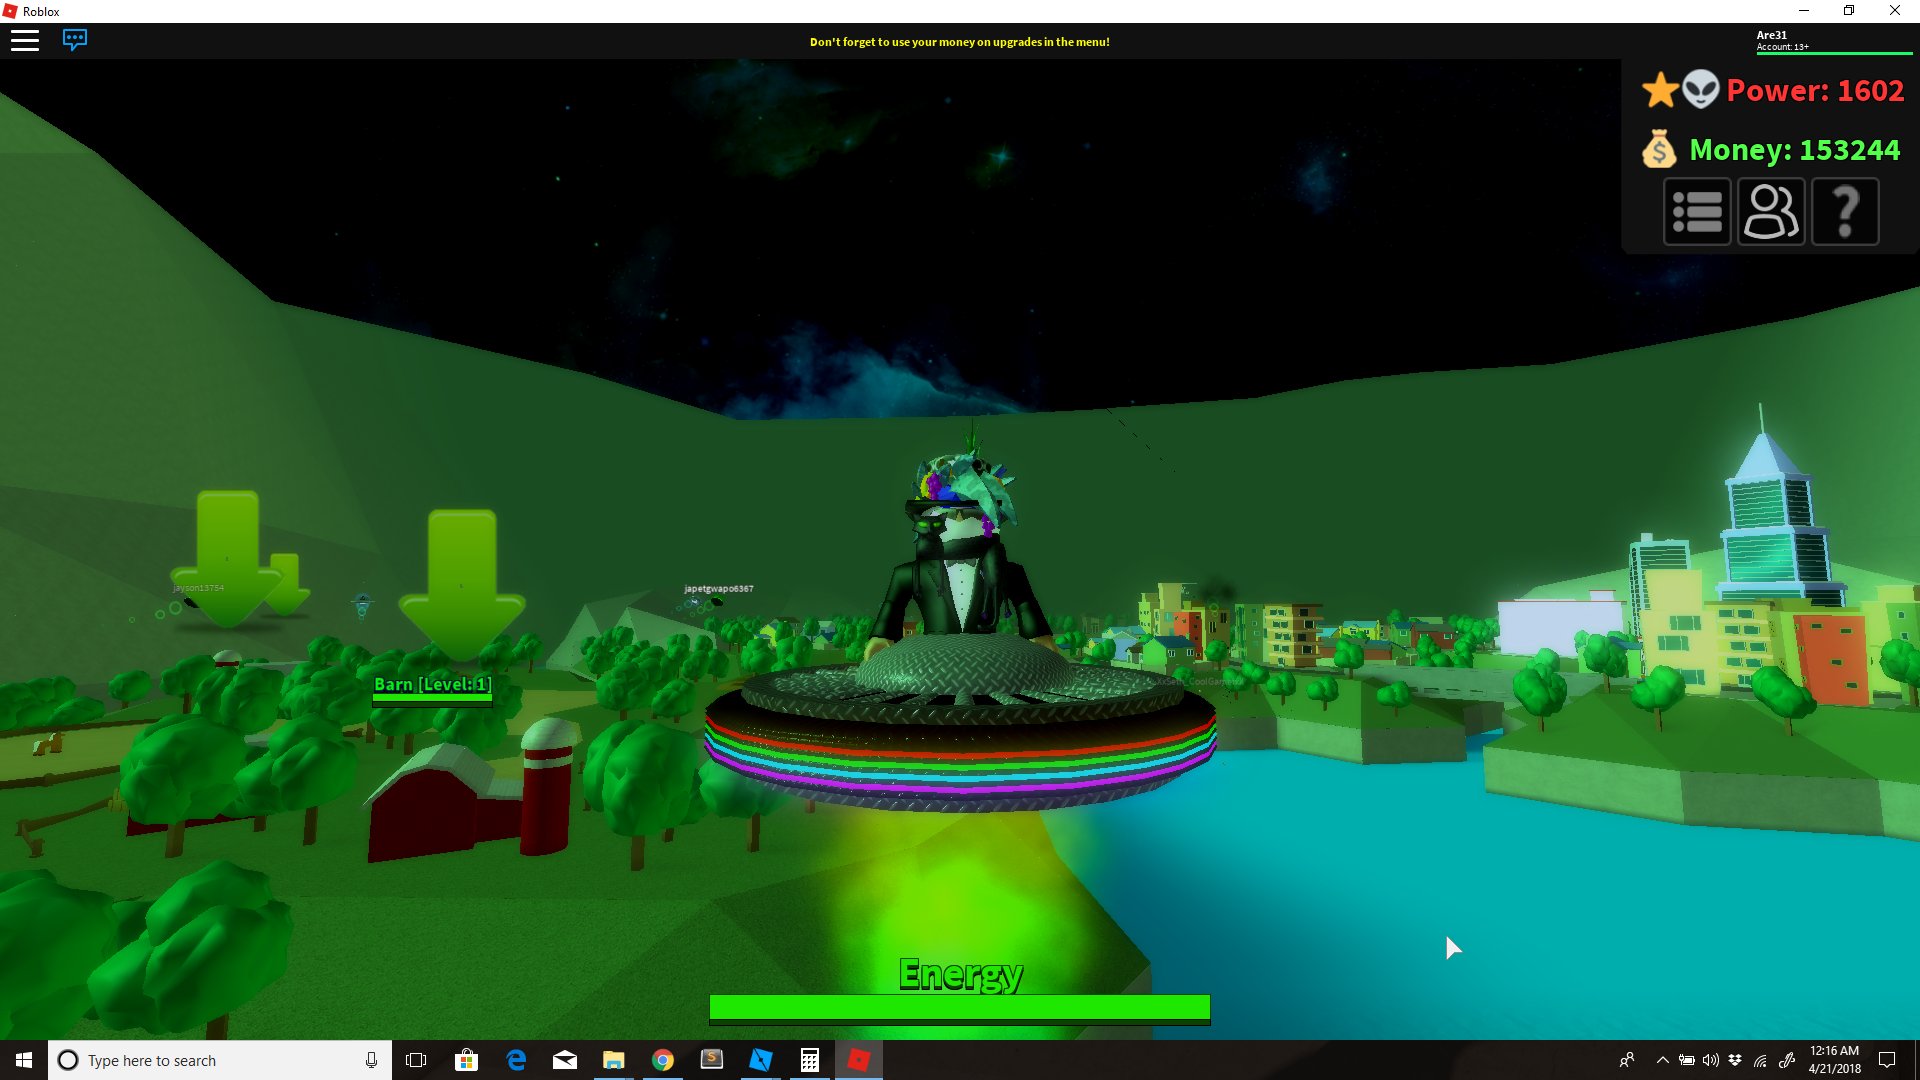 Are31 On Twitter Find Me In Alien Simulator Servers All Day Today 4 21 Https T Co Wigyvtcteo